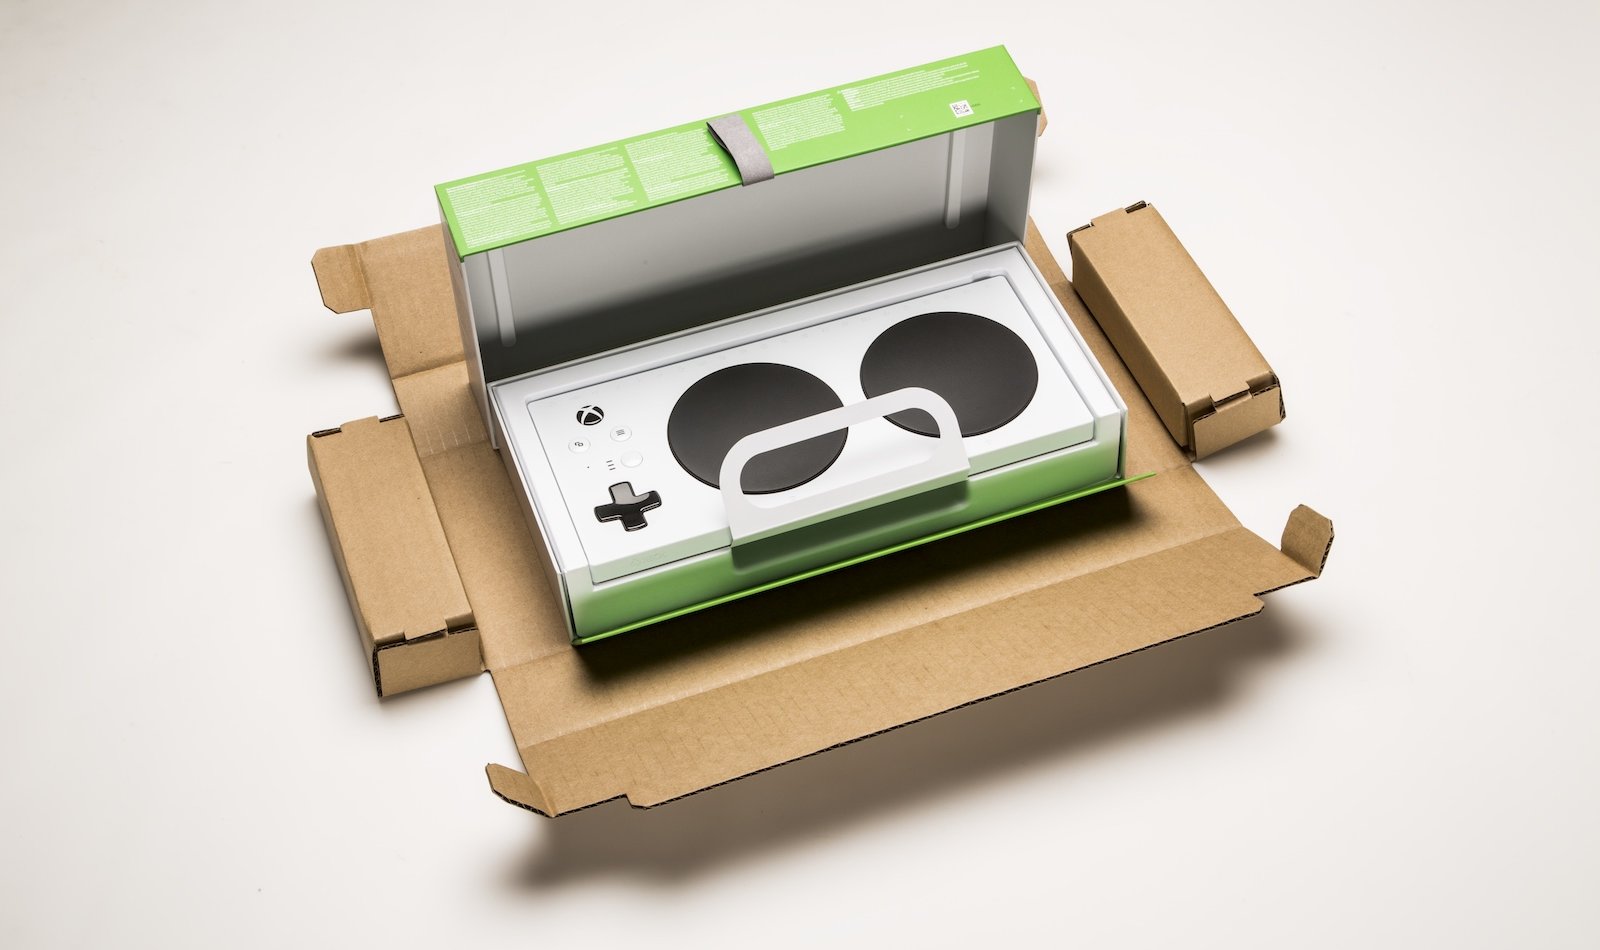 Xbox’s Adaptive Controller For Gamers With Disabilities Builds Accessibility Into The Packaging